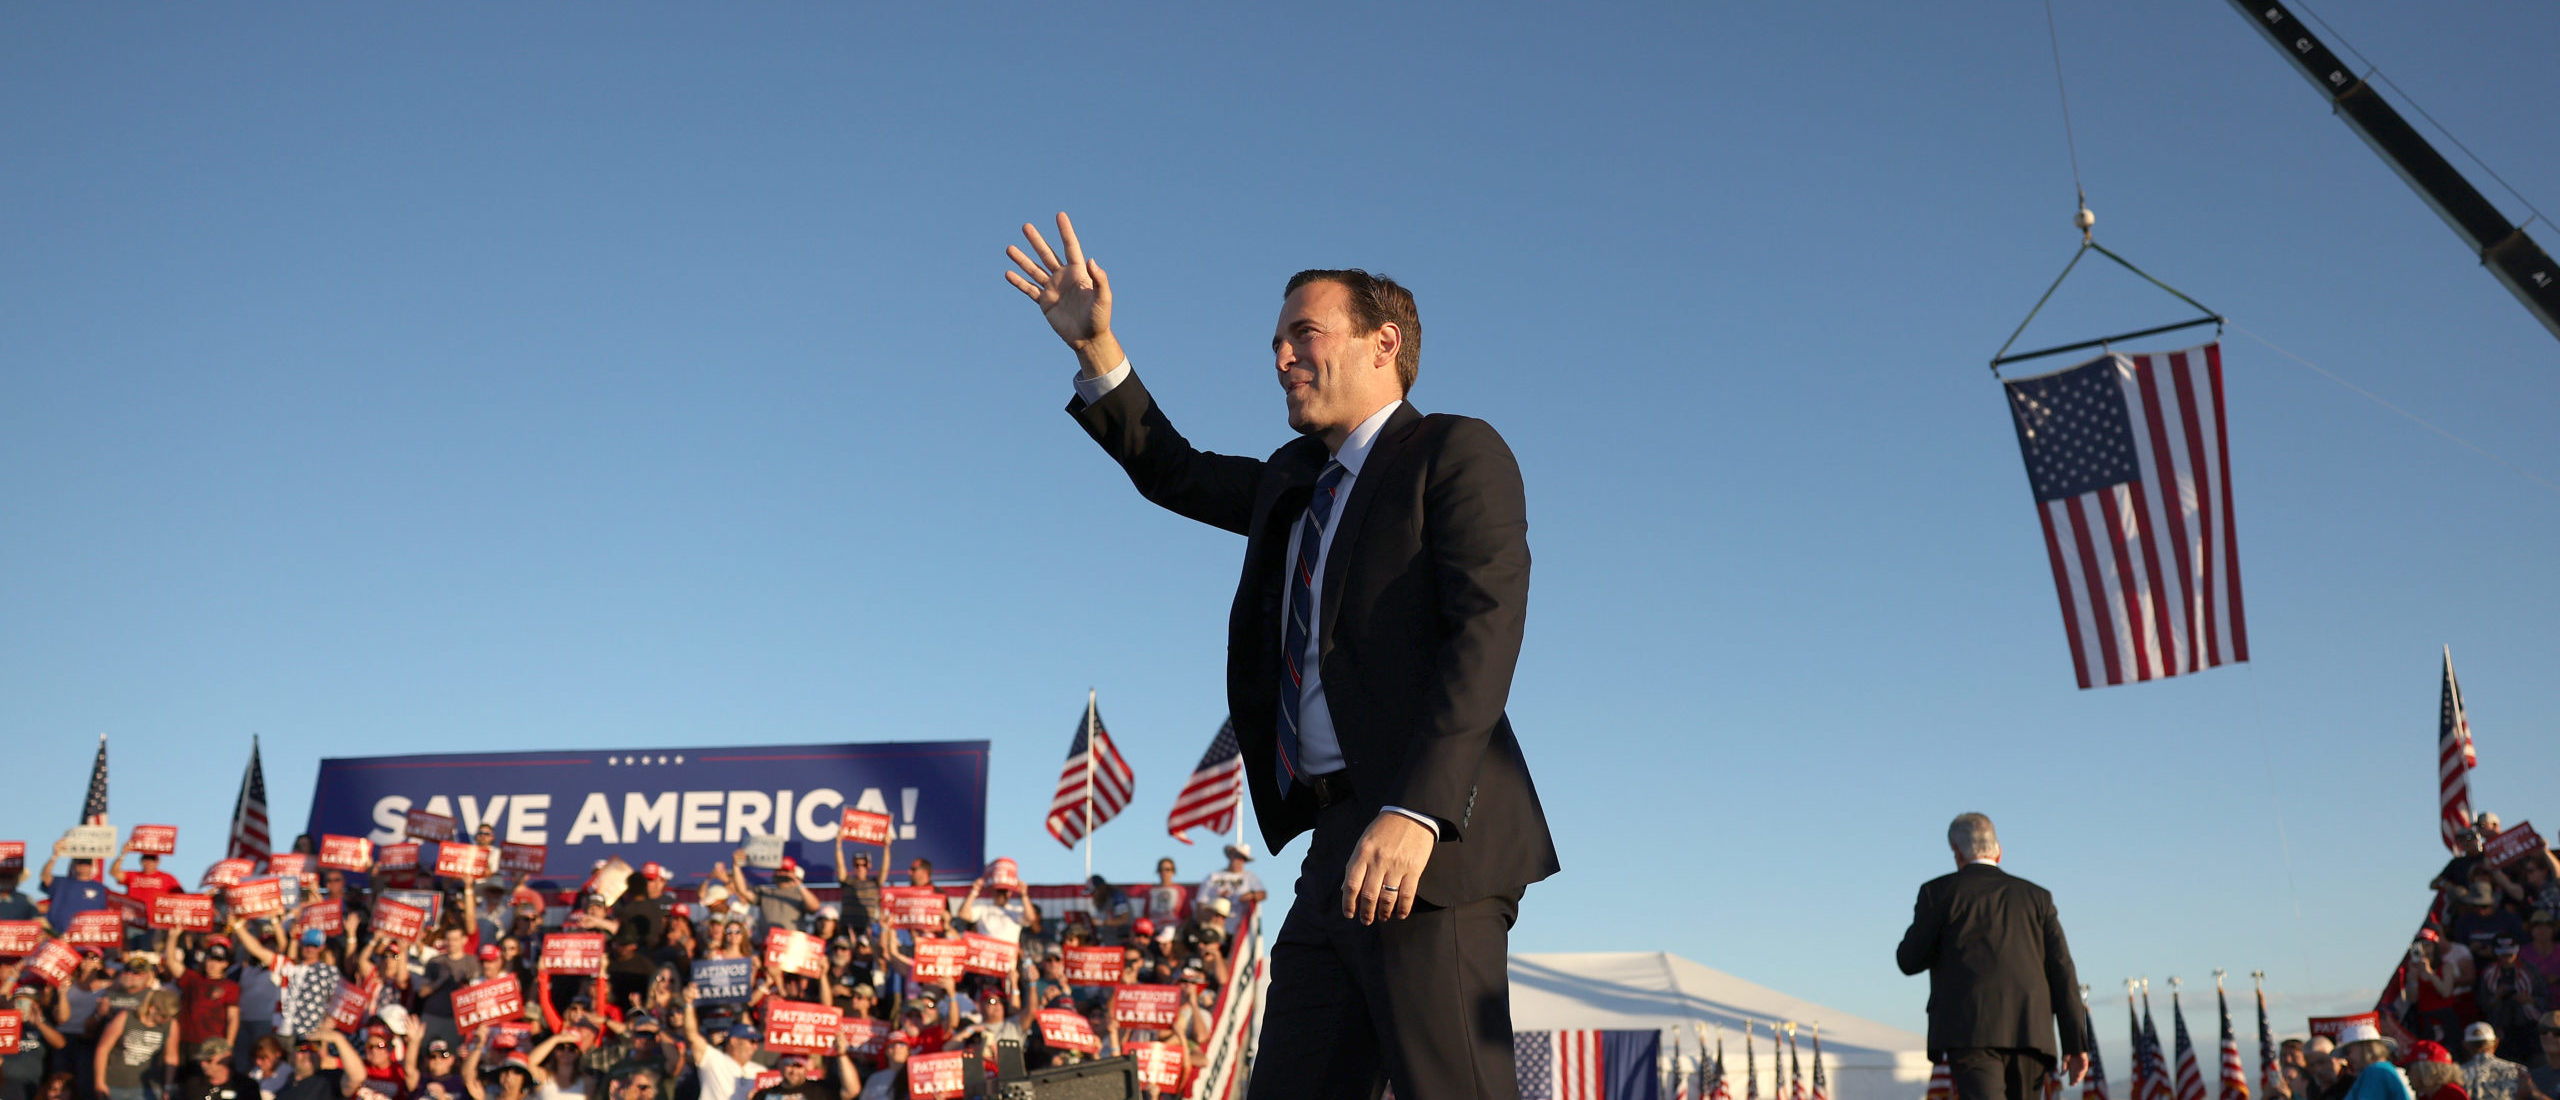 MINDEN, NEVADA - OCTOBER 08: Nevada Republican U.S. Senate candidate Adam Laxalt greets supporters during a campaign rally at Minden-Tahoe Airport on October 08, 2022 in Minden, Nevada. (Photo by Justin Sullivan/Getty Images)